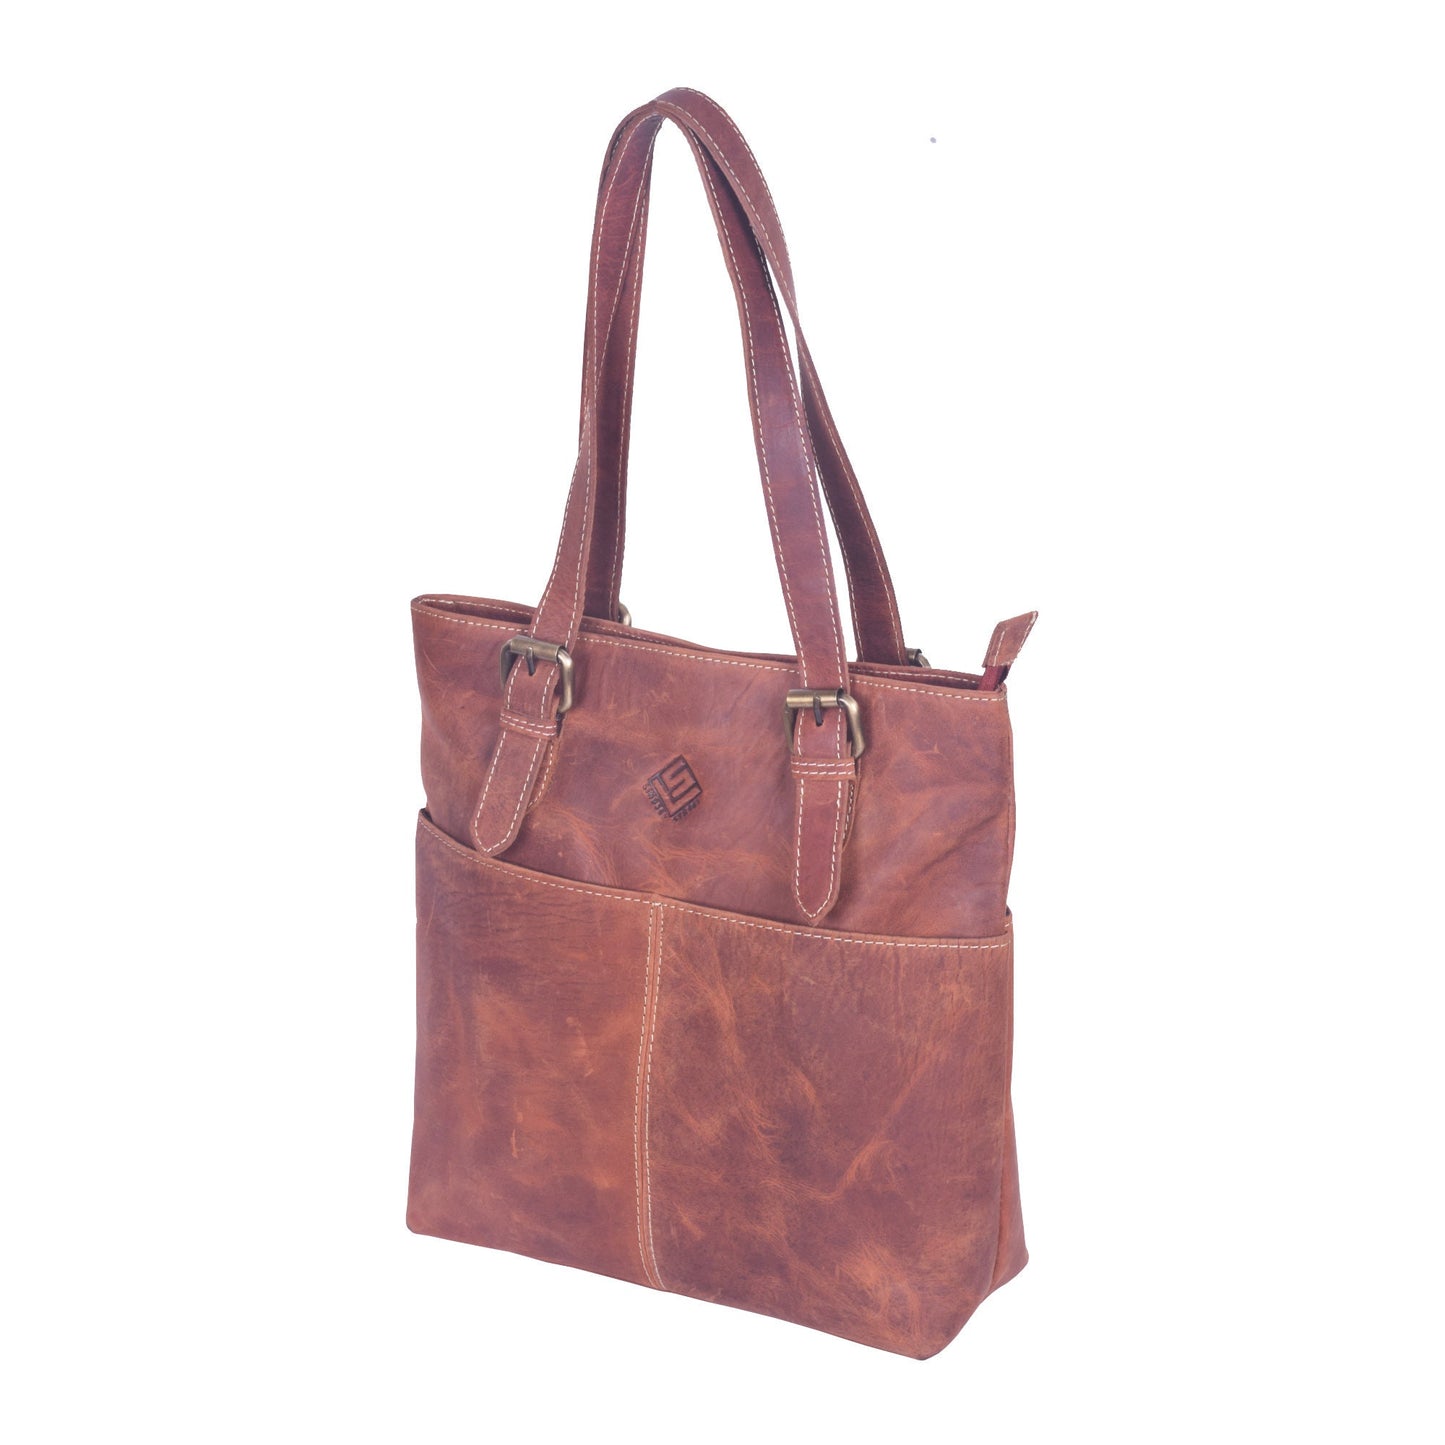 Leather Tote Bag for Women , Office Tote Bag Everyday Leather Tote, Shoulder Bag with Pockets Daily Use Tote Purse